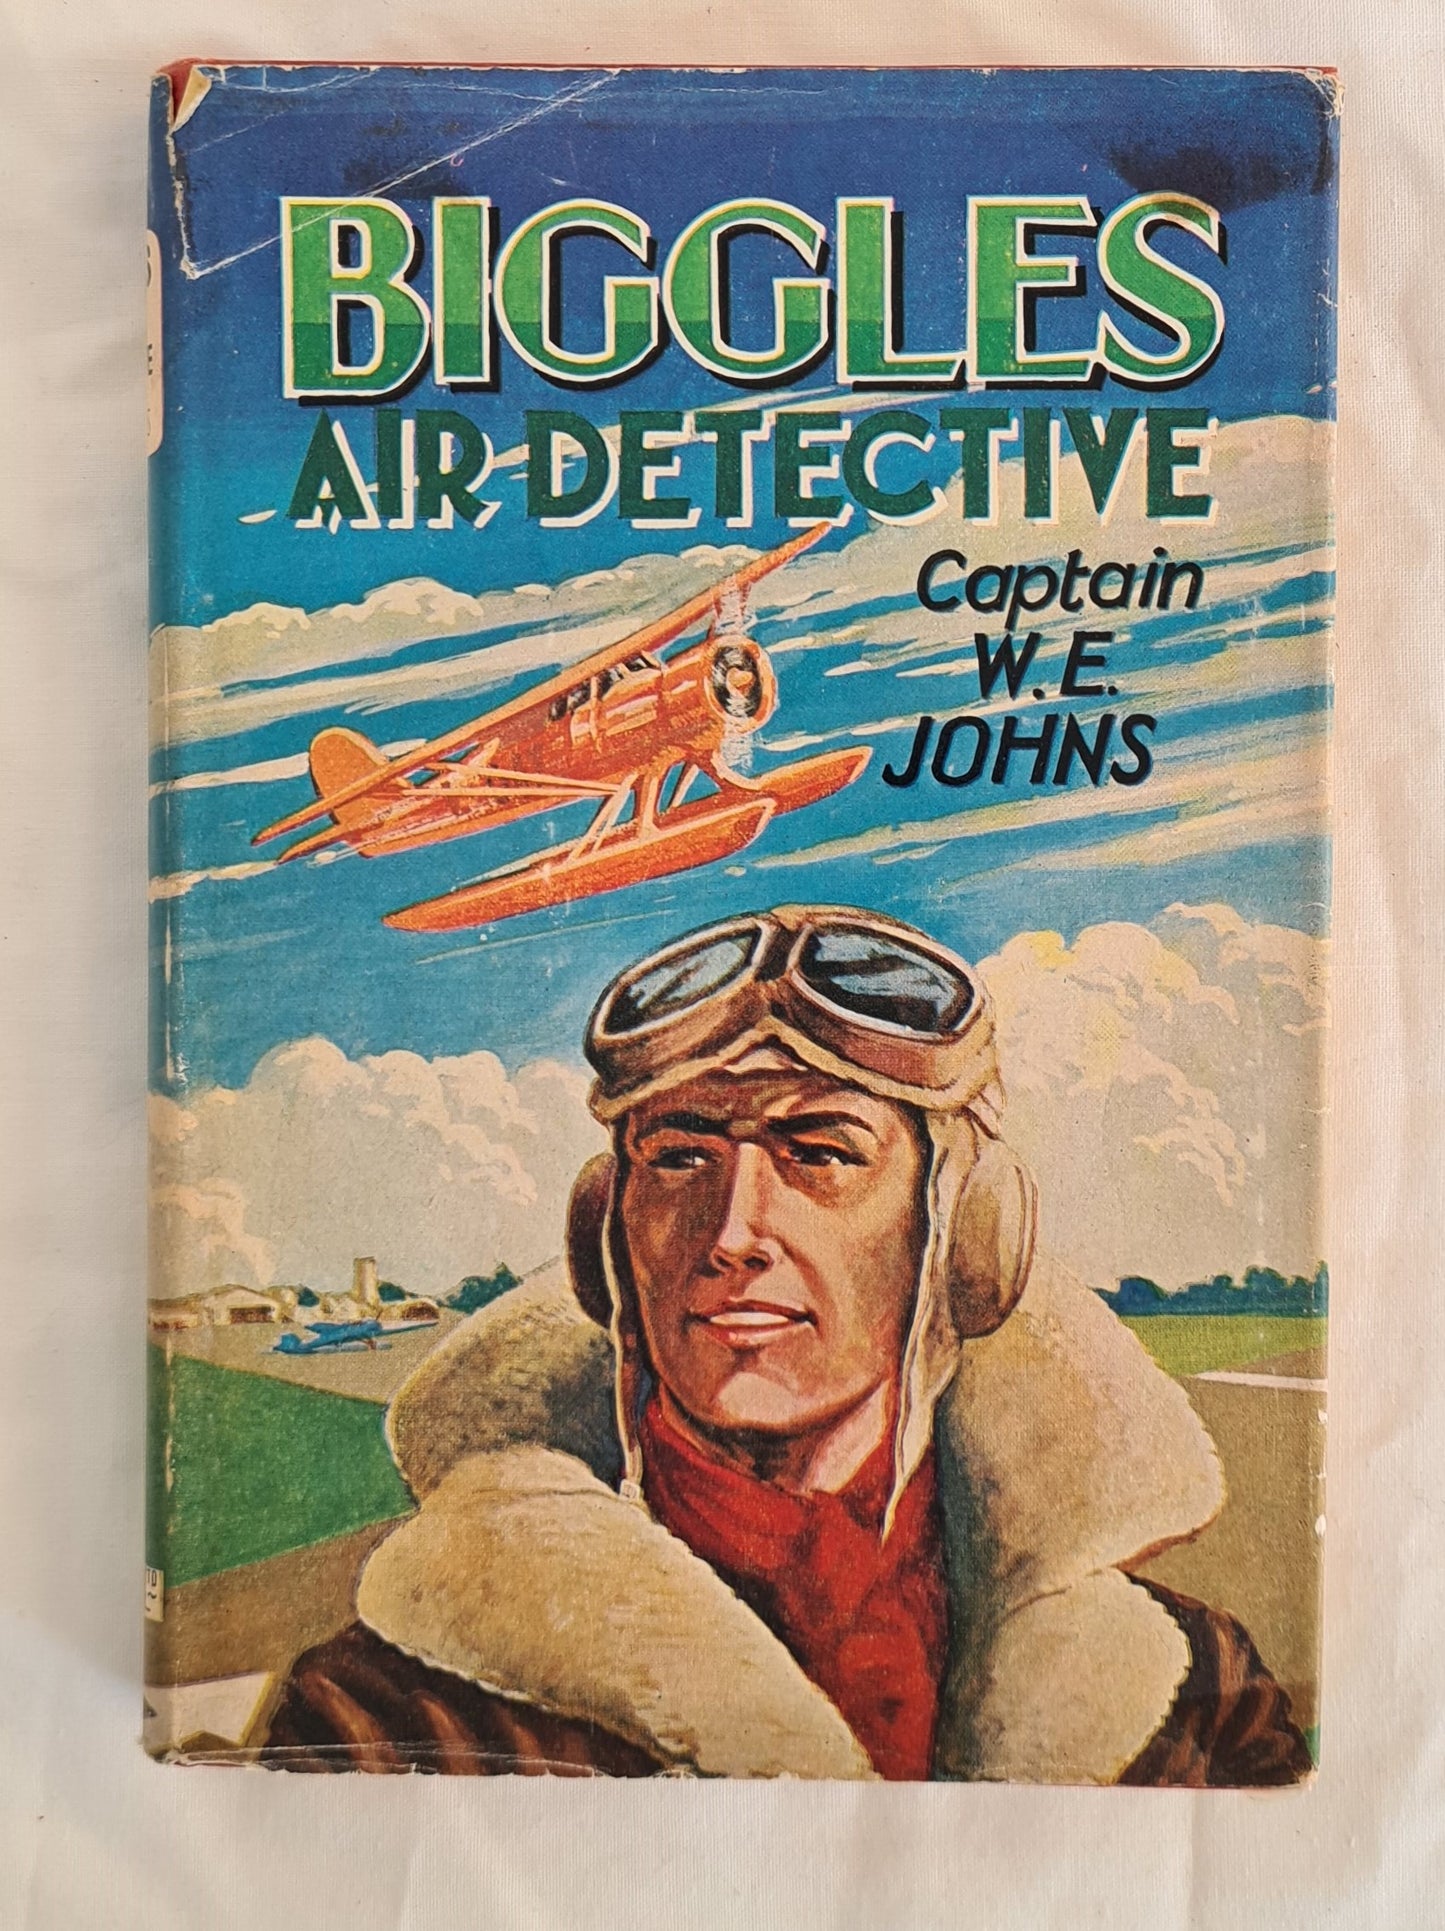 Biggles Air Detective  by Captain W. E. Johns